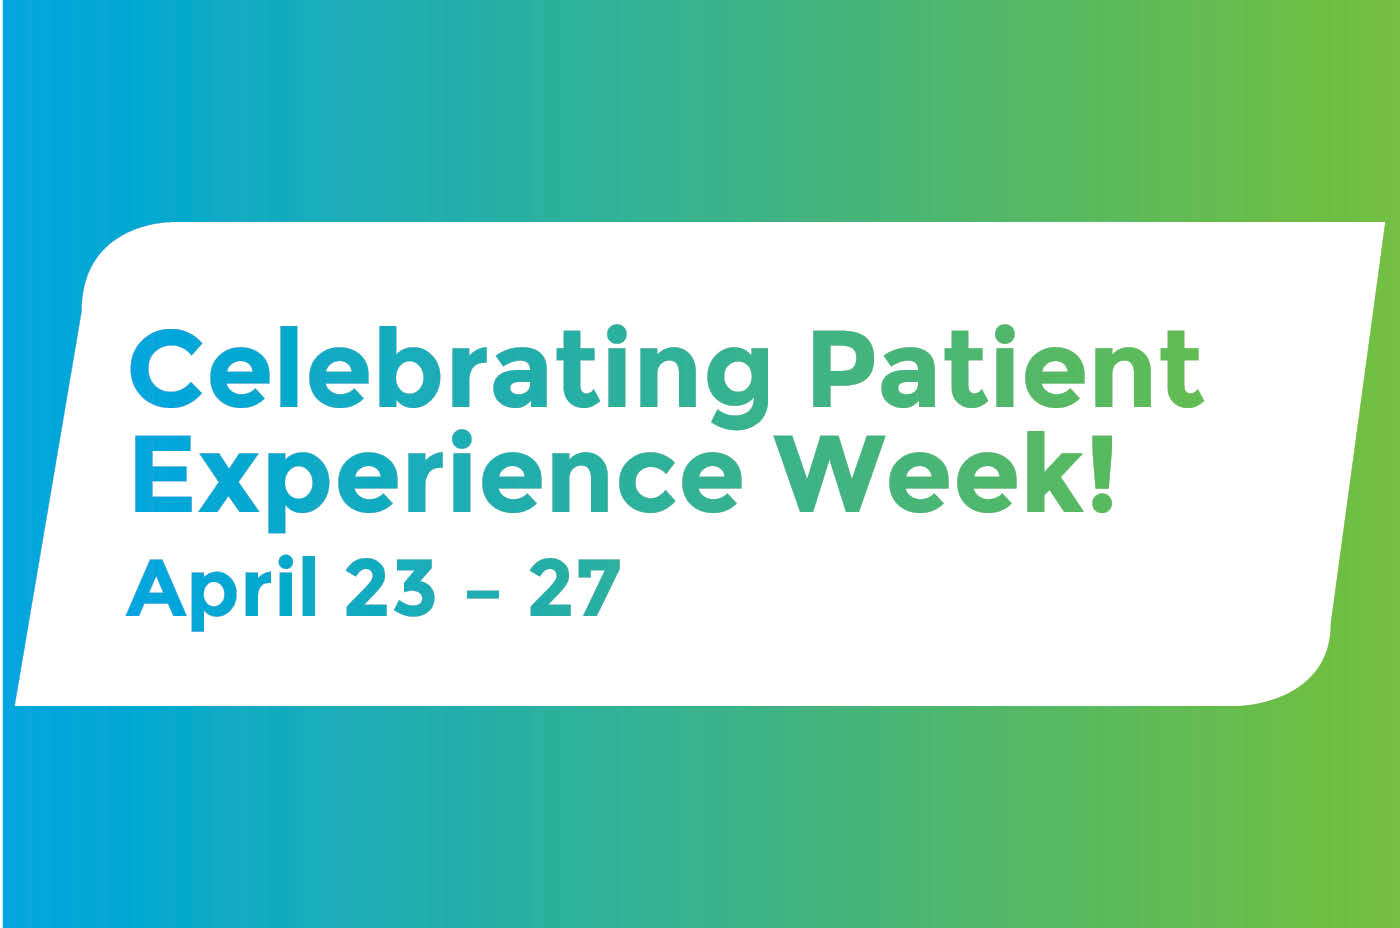 We’re Celebrating Patient Experience Week with Five Days of New Resources!